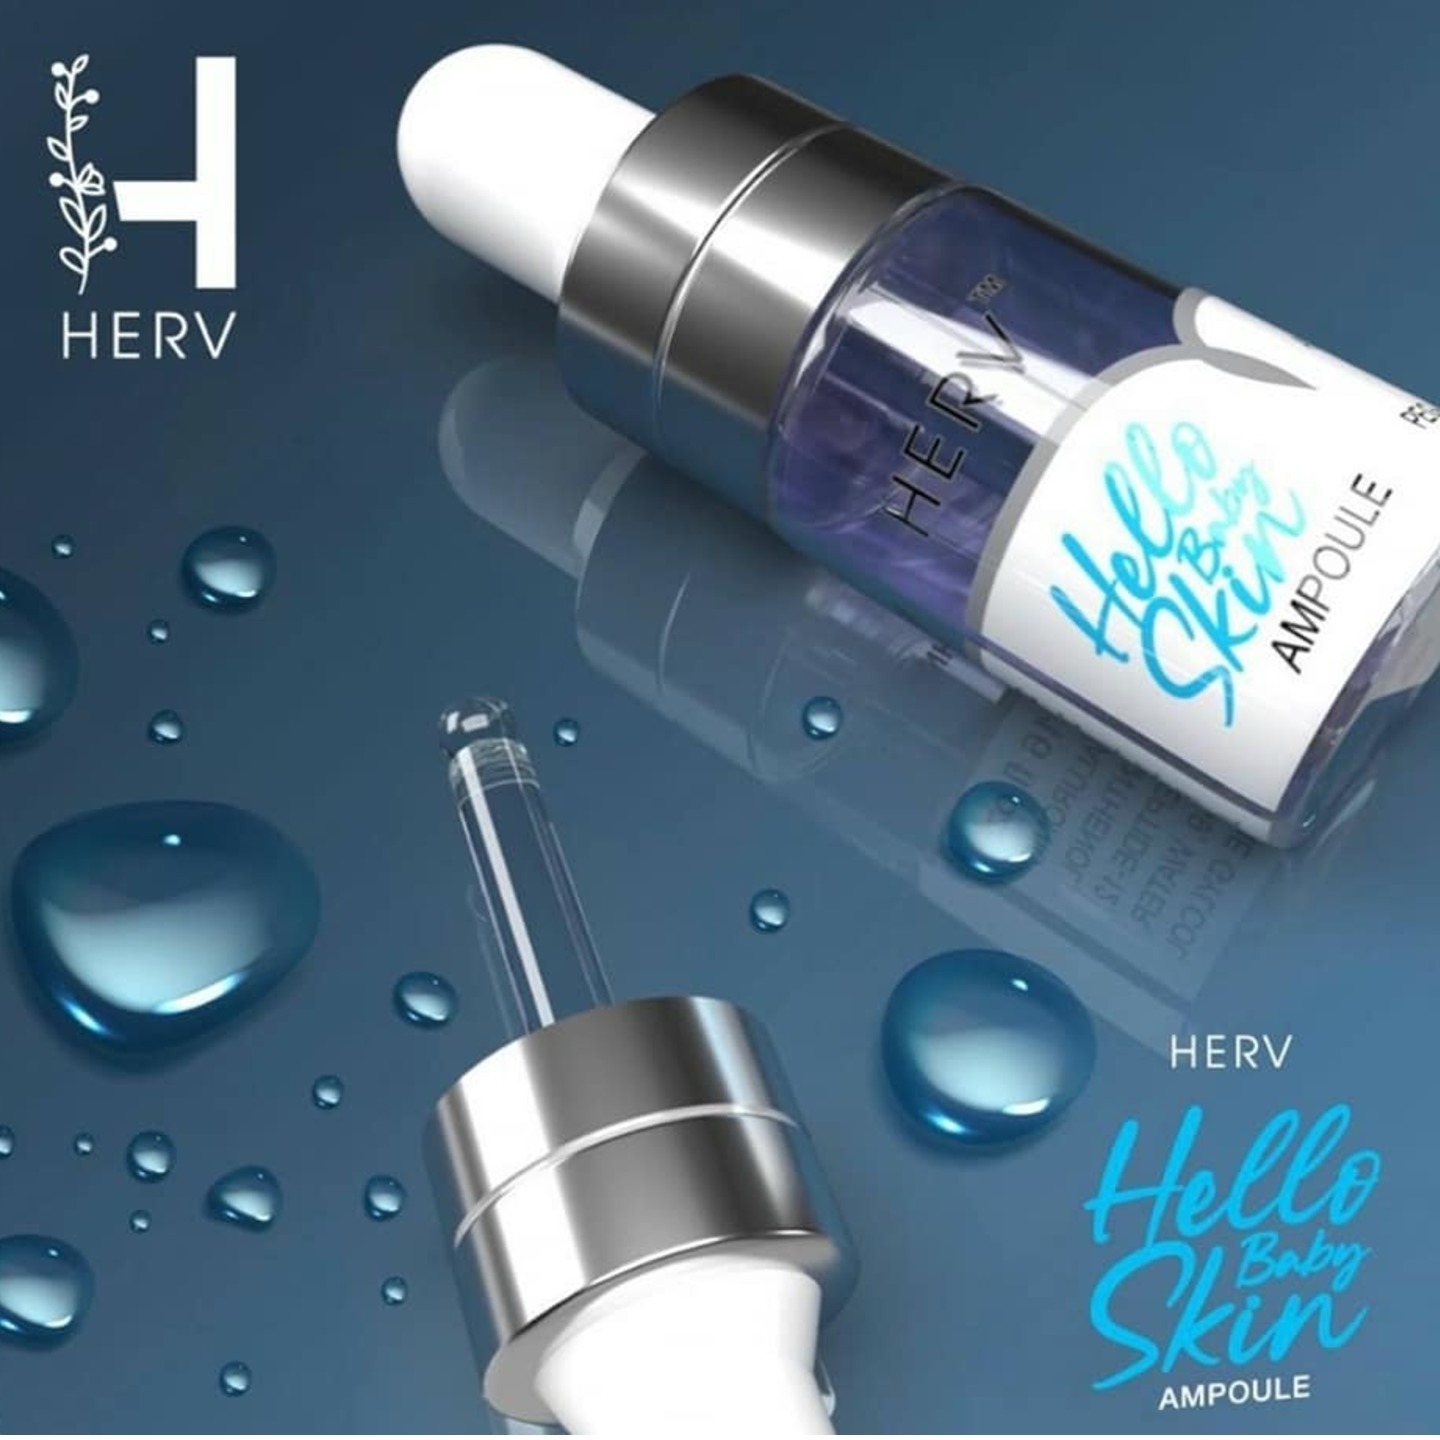 HERV Hello Baby Skin Ampoule